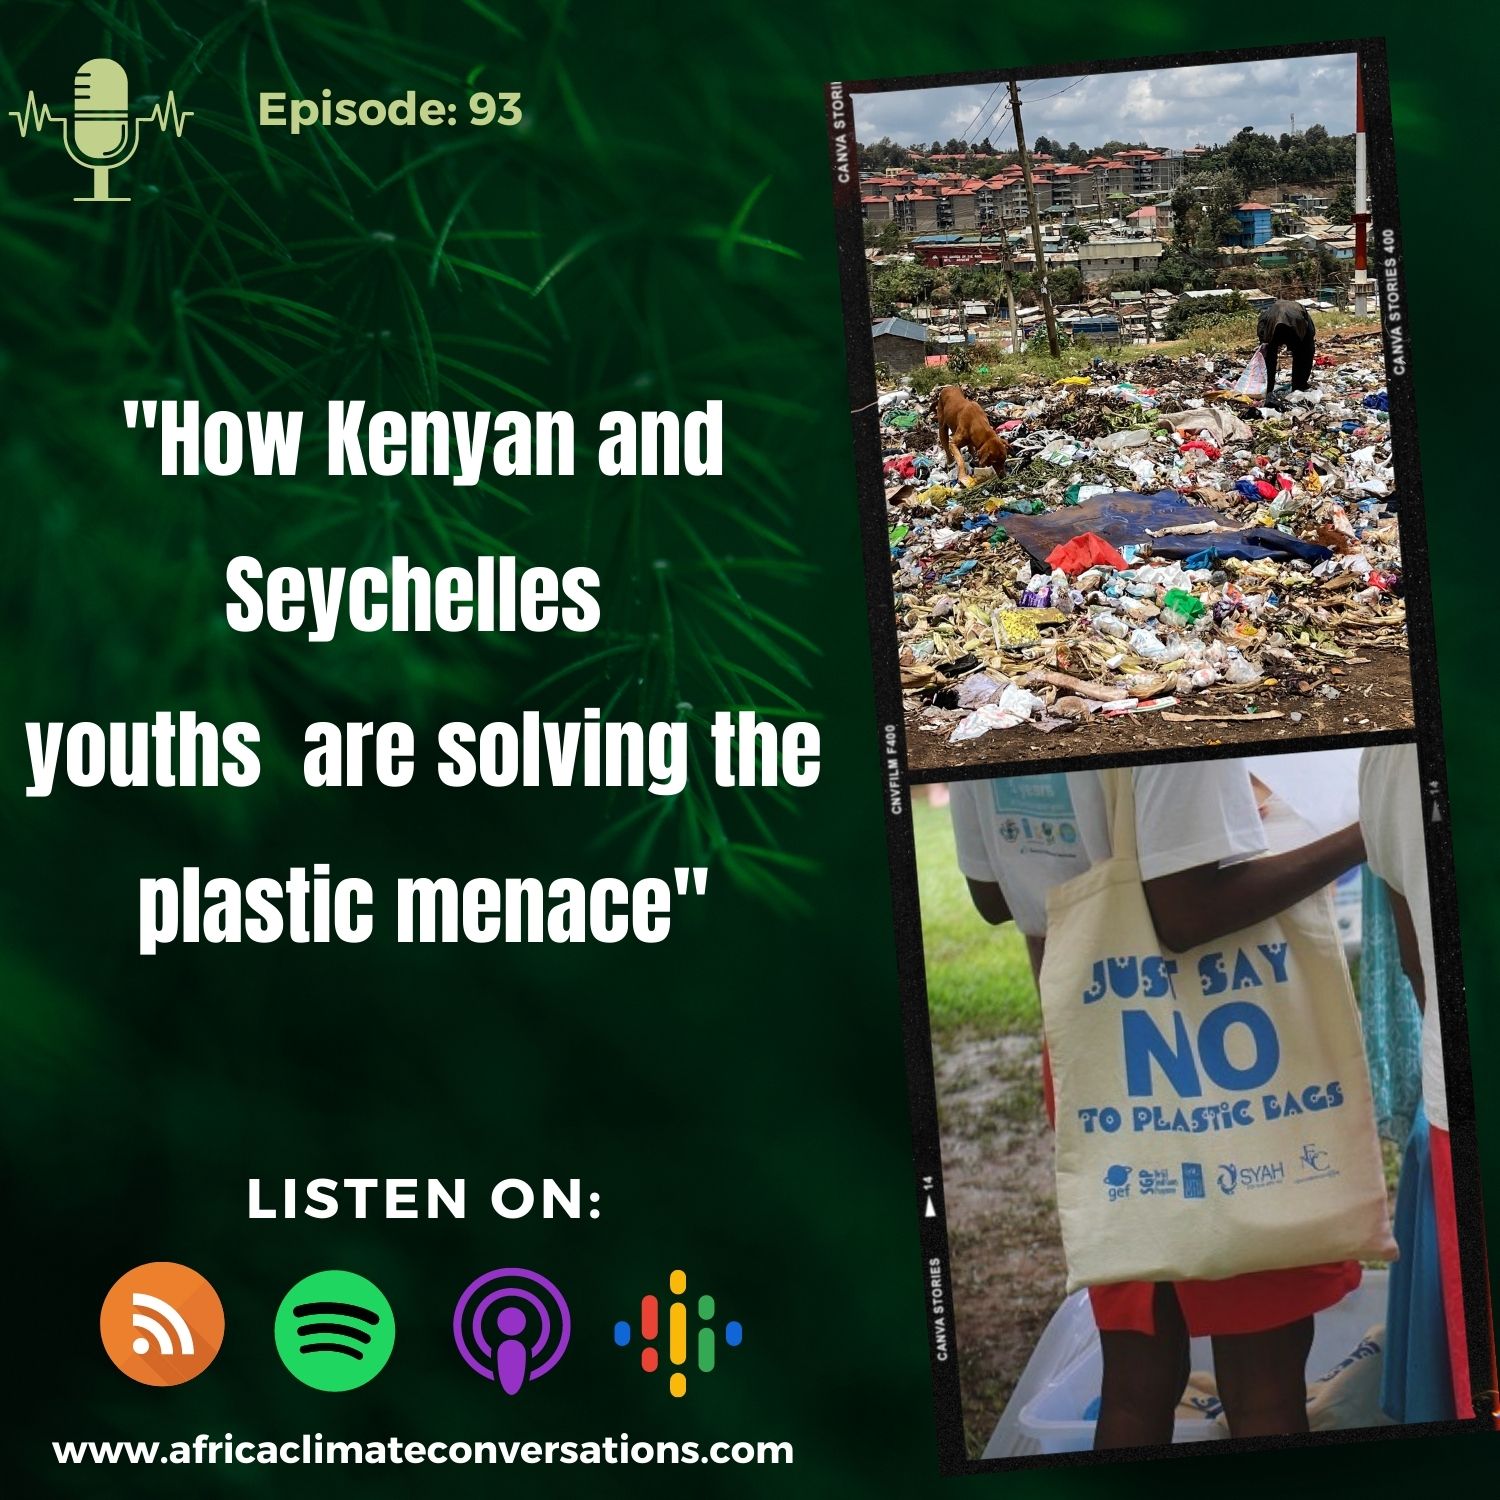 How Kenyan and Seychelles youths are solving the plastic menace